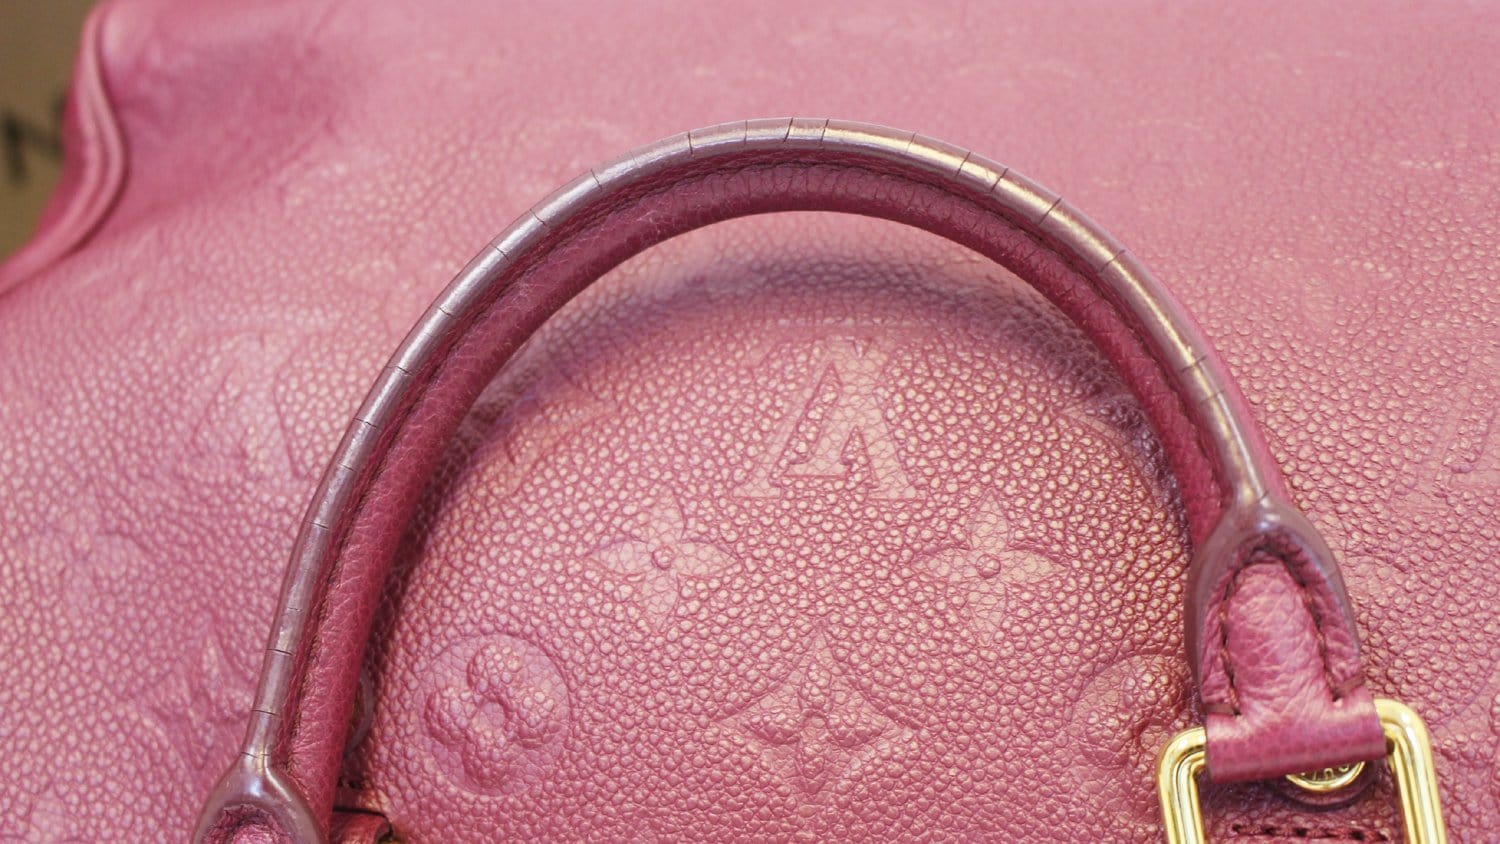 Leather backpack Louis Vuitton Pink in Leather - 32552002